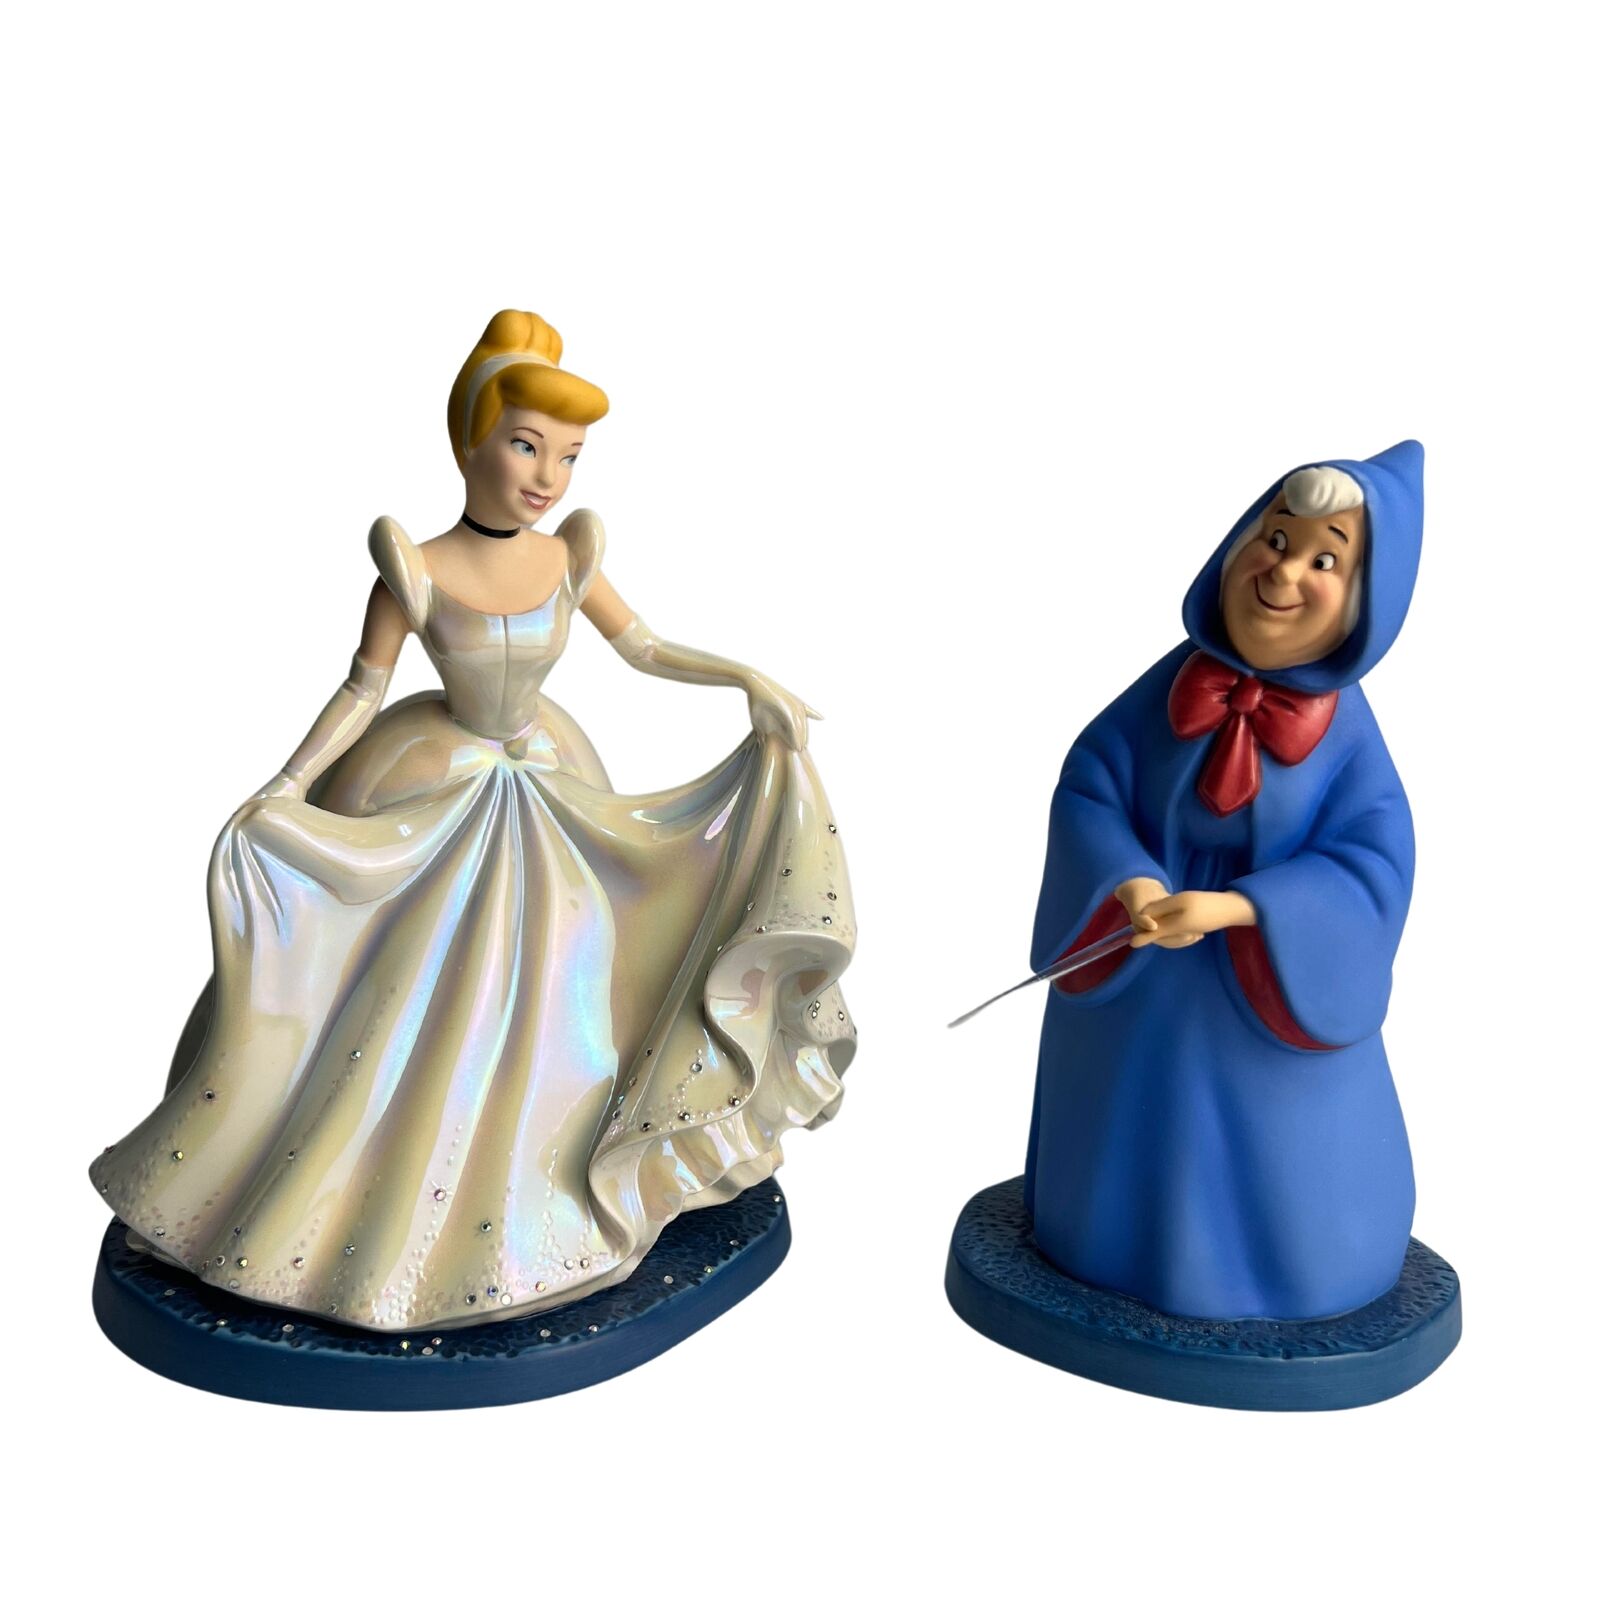 WDCC Fairy Godmother, Cinderella - A Magical Transformation | New in Box